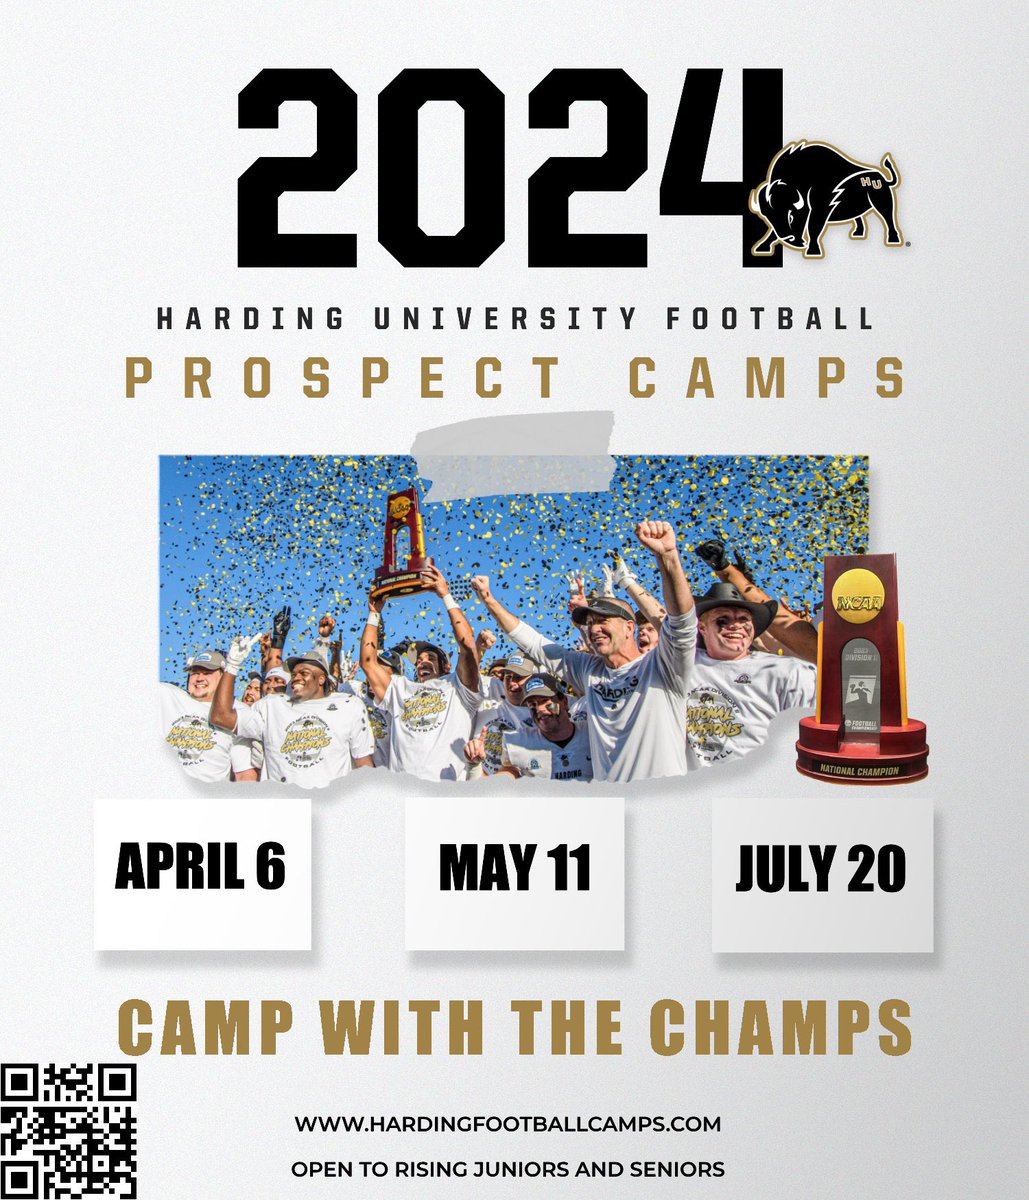 Camp dates are set and registration is open! Visit hardingfootballcamps.com and sign up to camp with the 2023 National Champions! #HonorGod